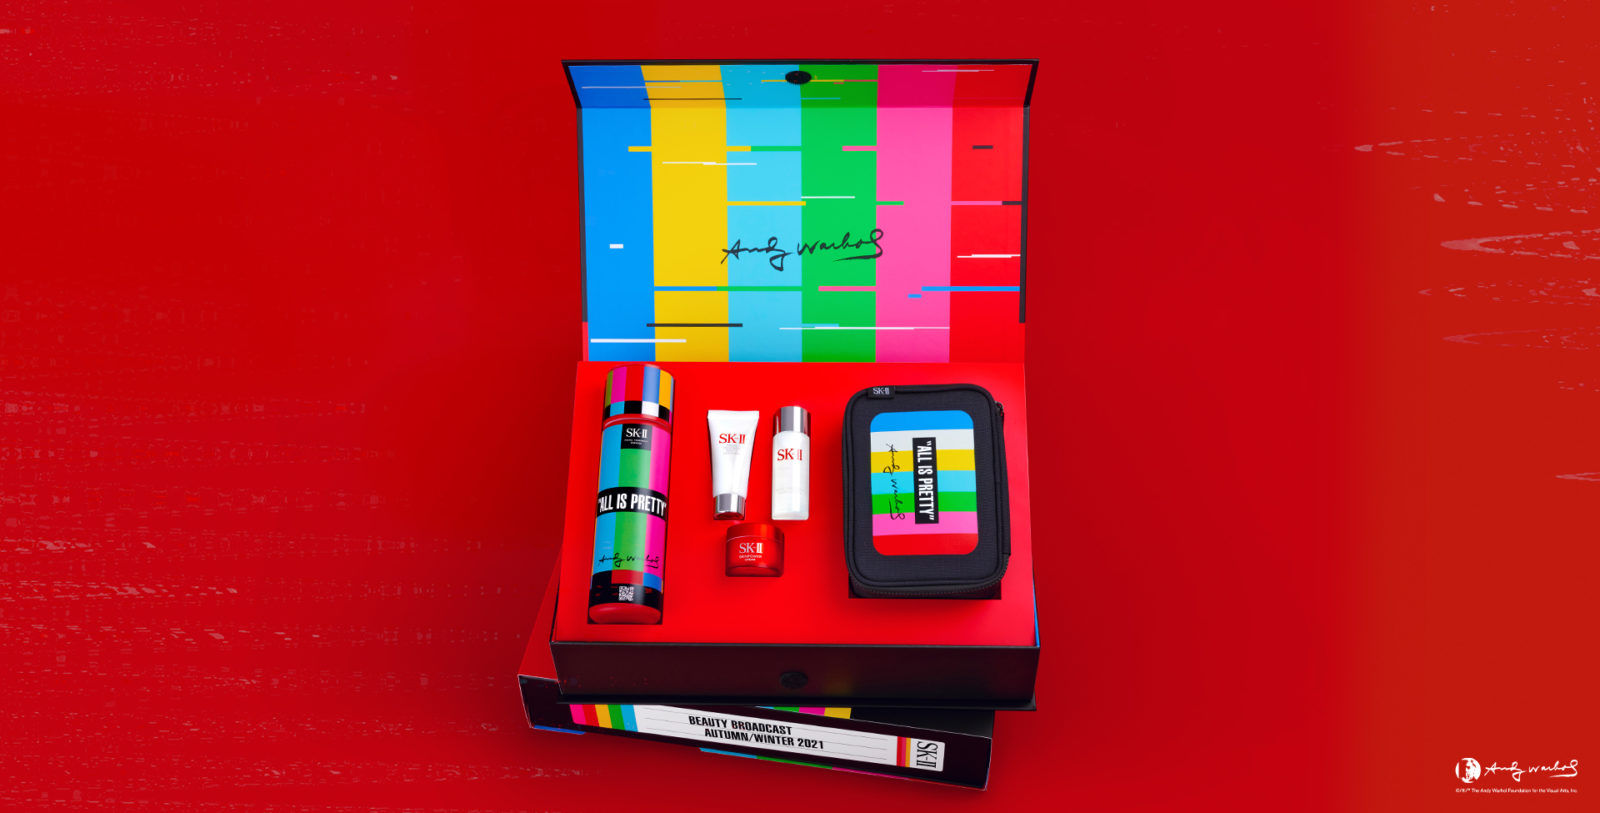 Andy Warhol X SK-II limited-edition essence set gives you the gift of clear skin